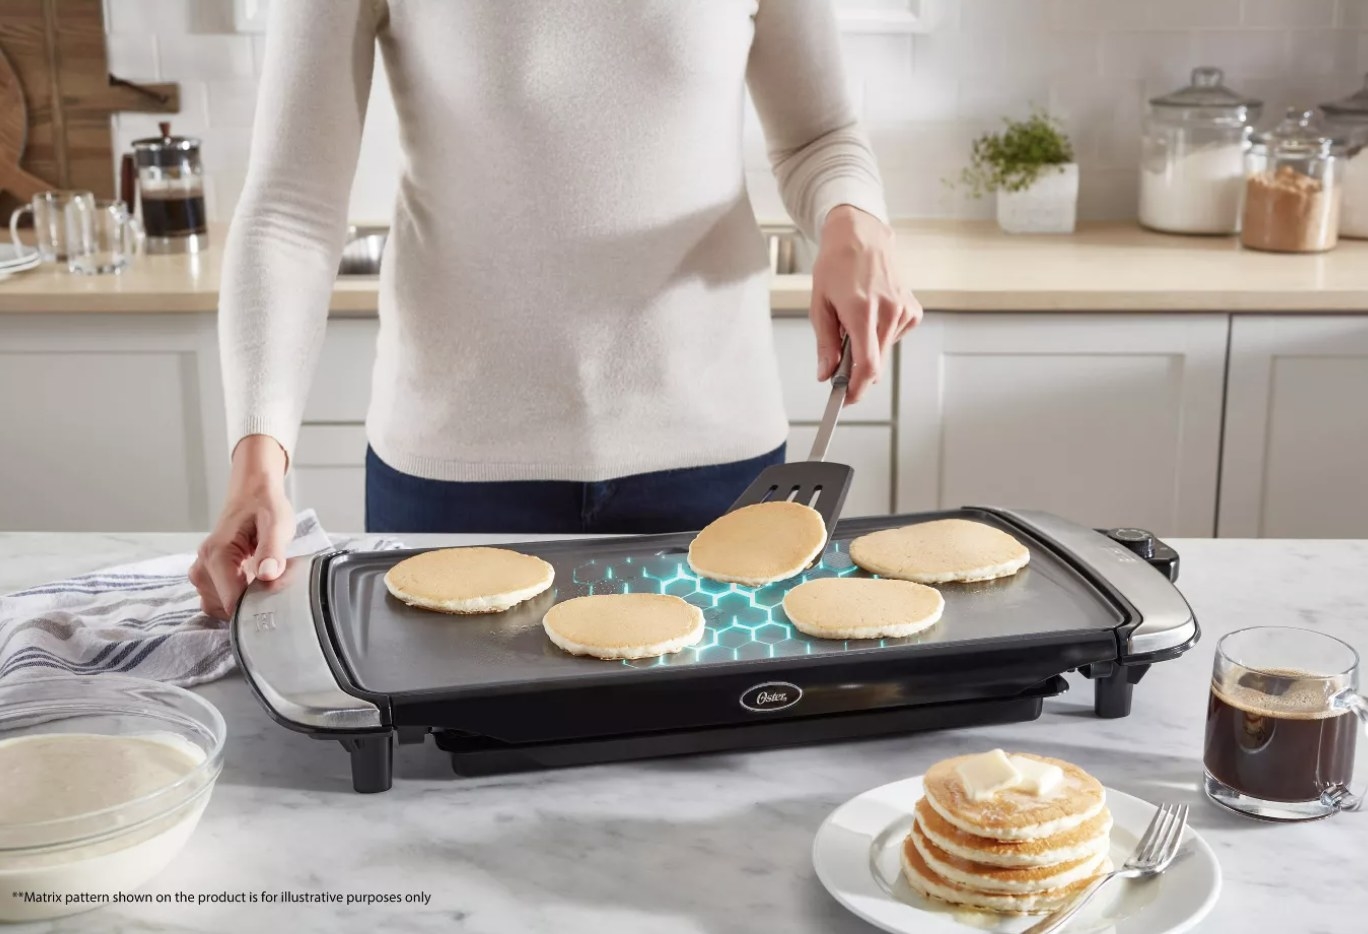 Person is flipping a pancake on an electric griddle